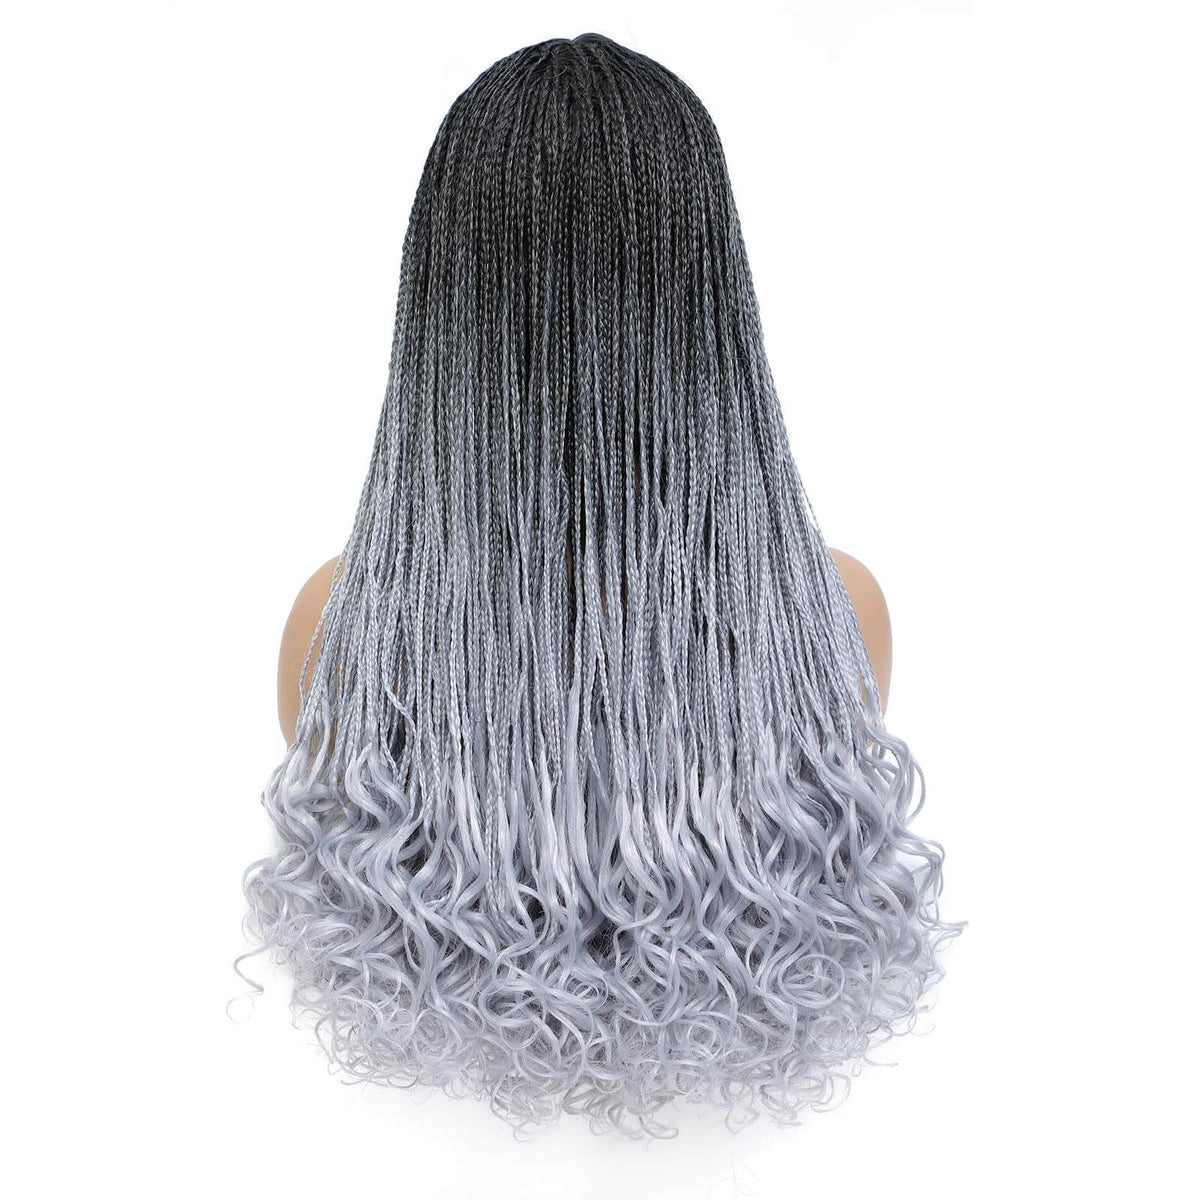 Ombre Grey Box Braided Wigs 30' Long Micro Braids With, 50% OFF